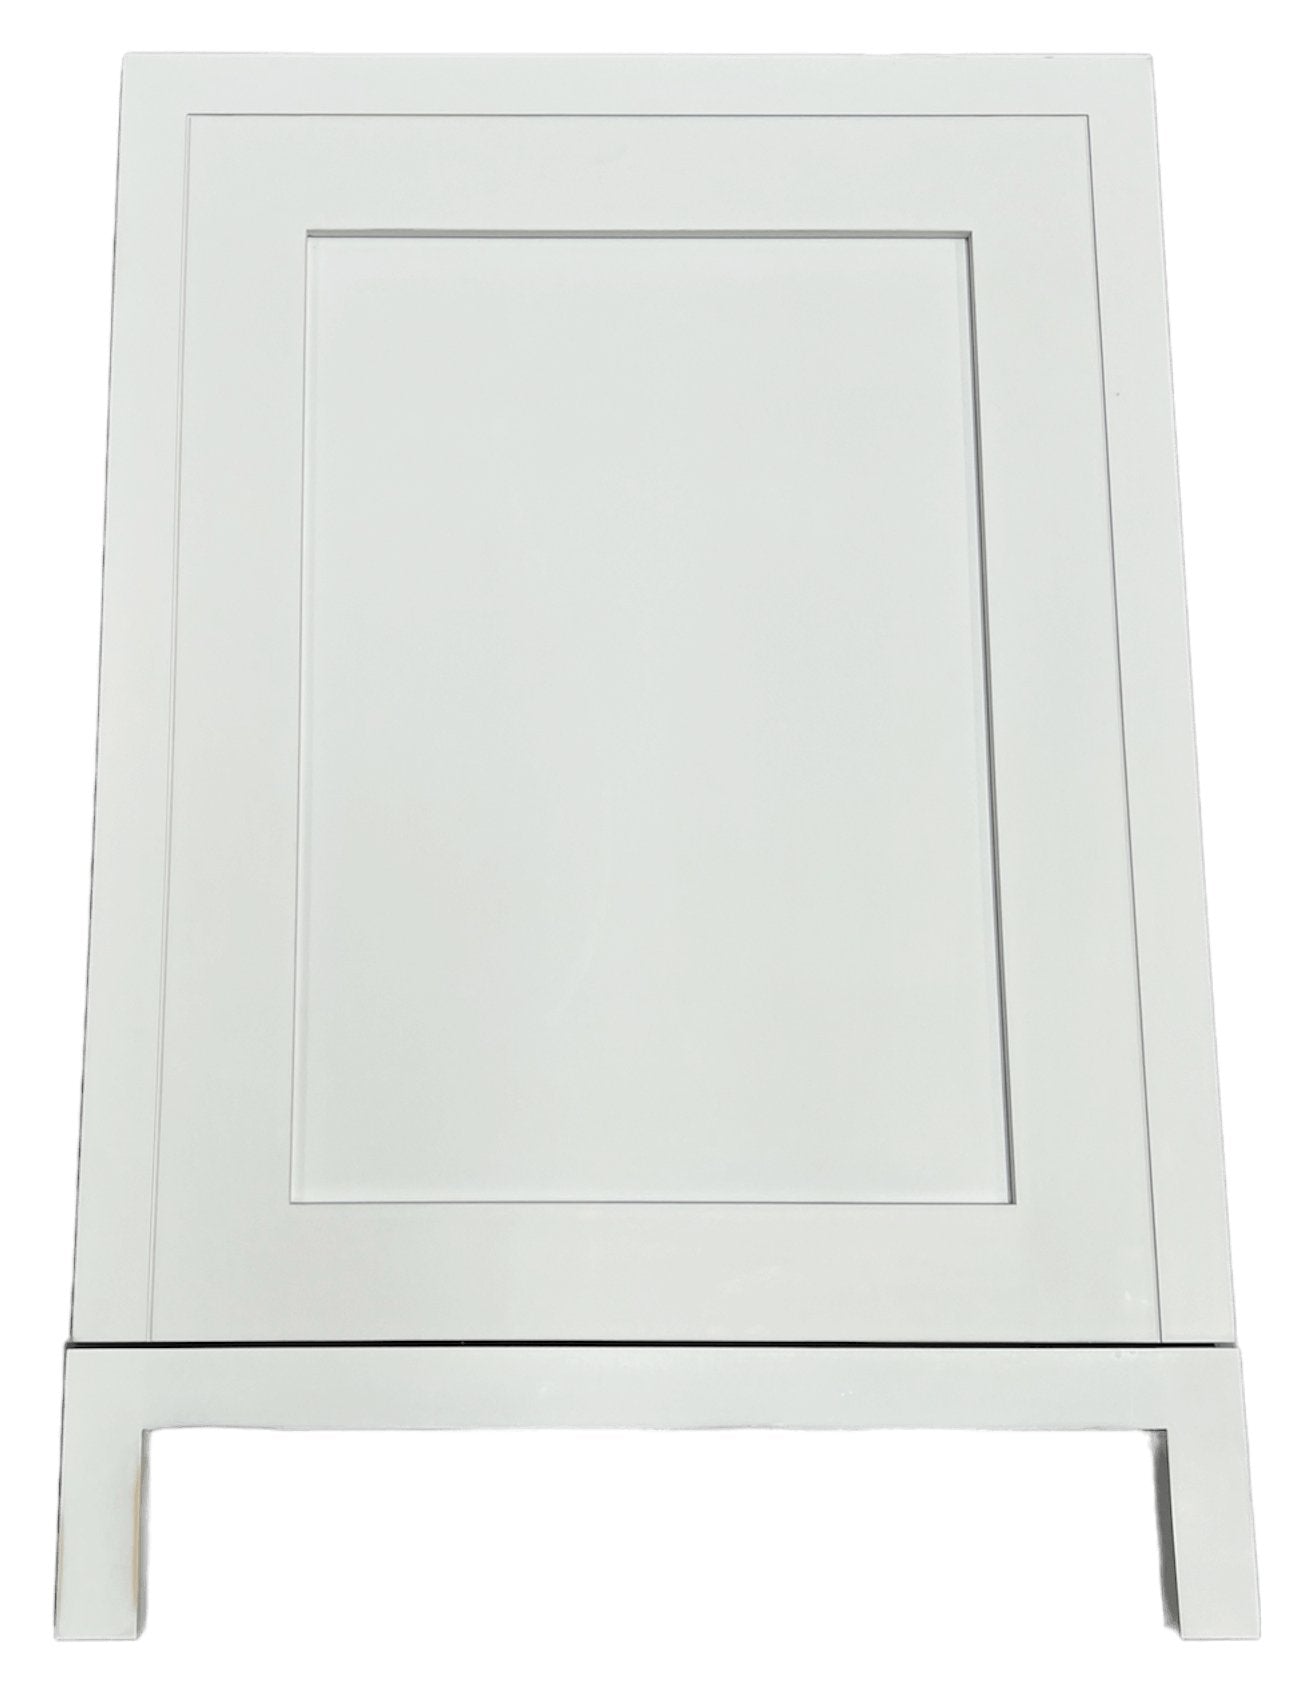 APD - 600mm Appliance Door - Classic Kitchens Direct